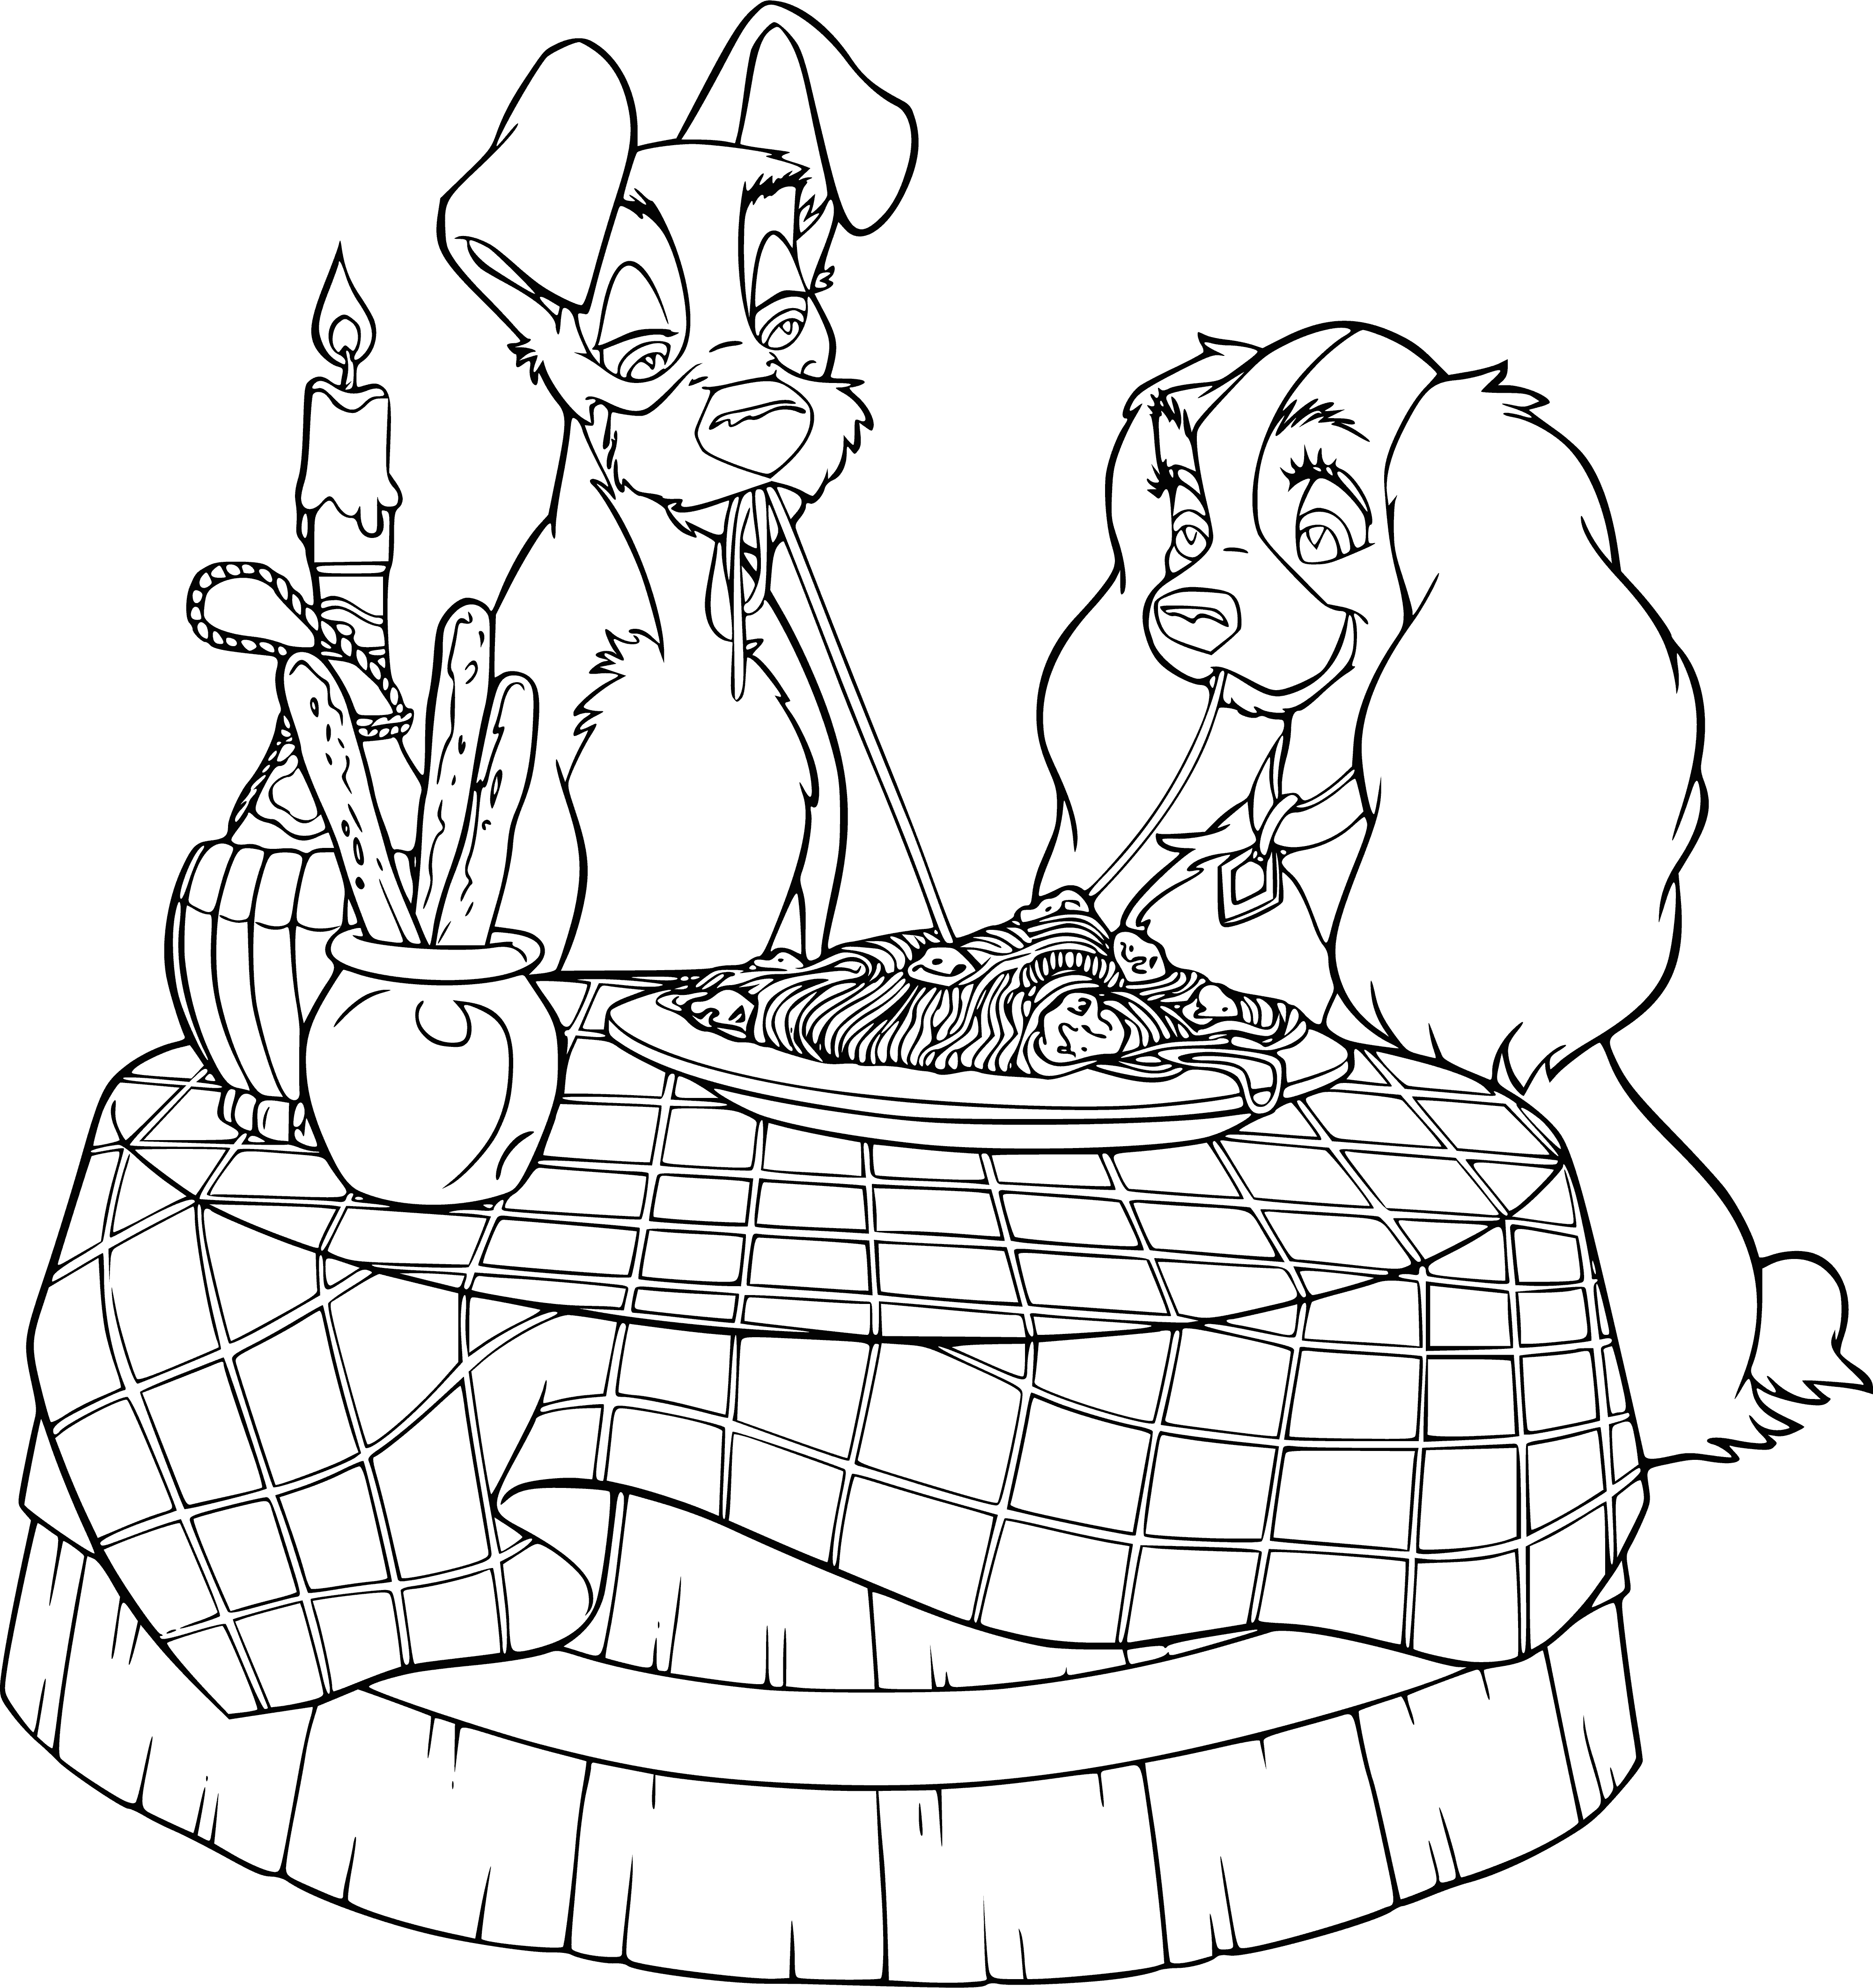 Romantic dinner coloring page